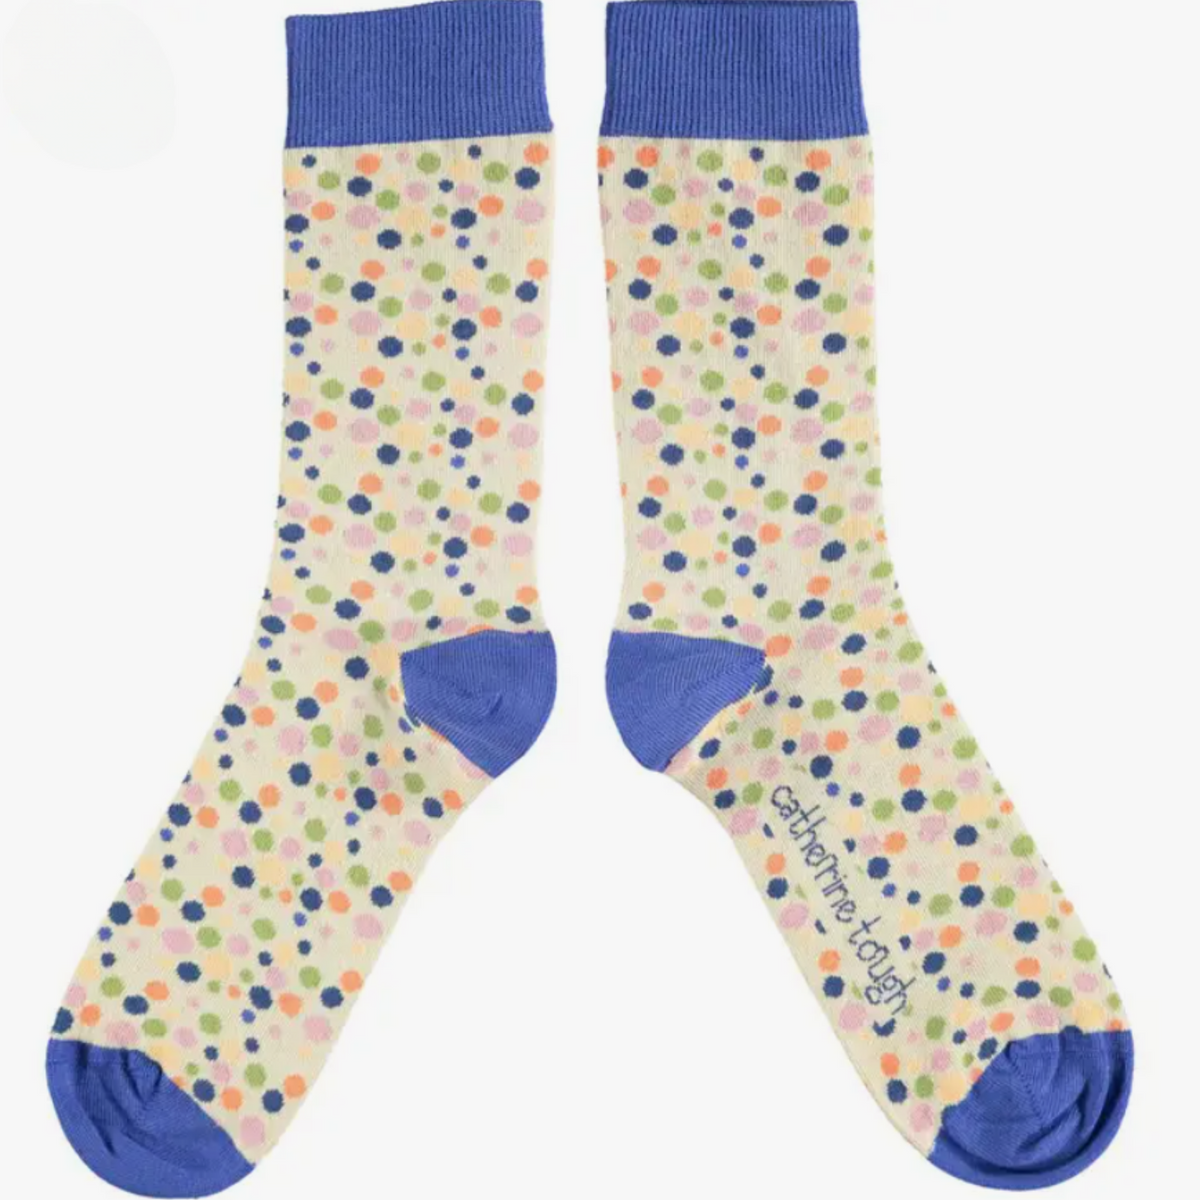 Catherine Tough Polka Dot cotton women&#39;s crew socks. The design features blue, green, pink and more polka dots framed with soft blue cuffs, heels &amp; toes.